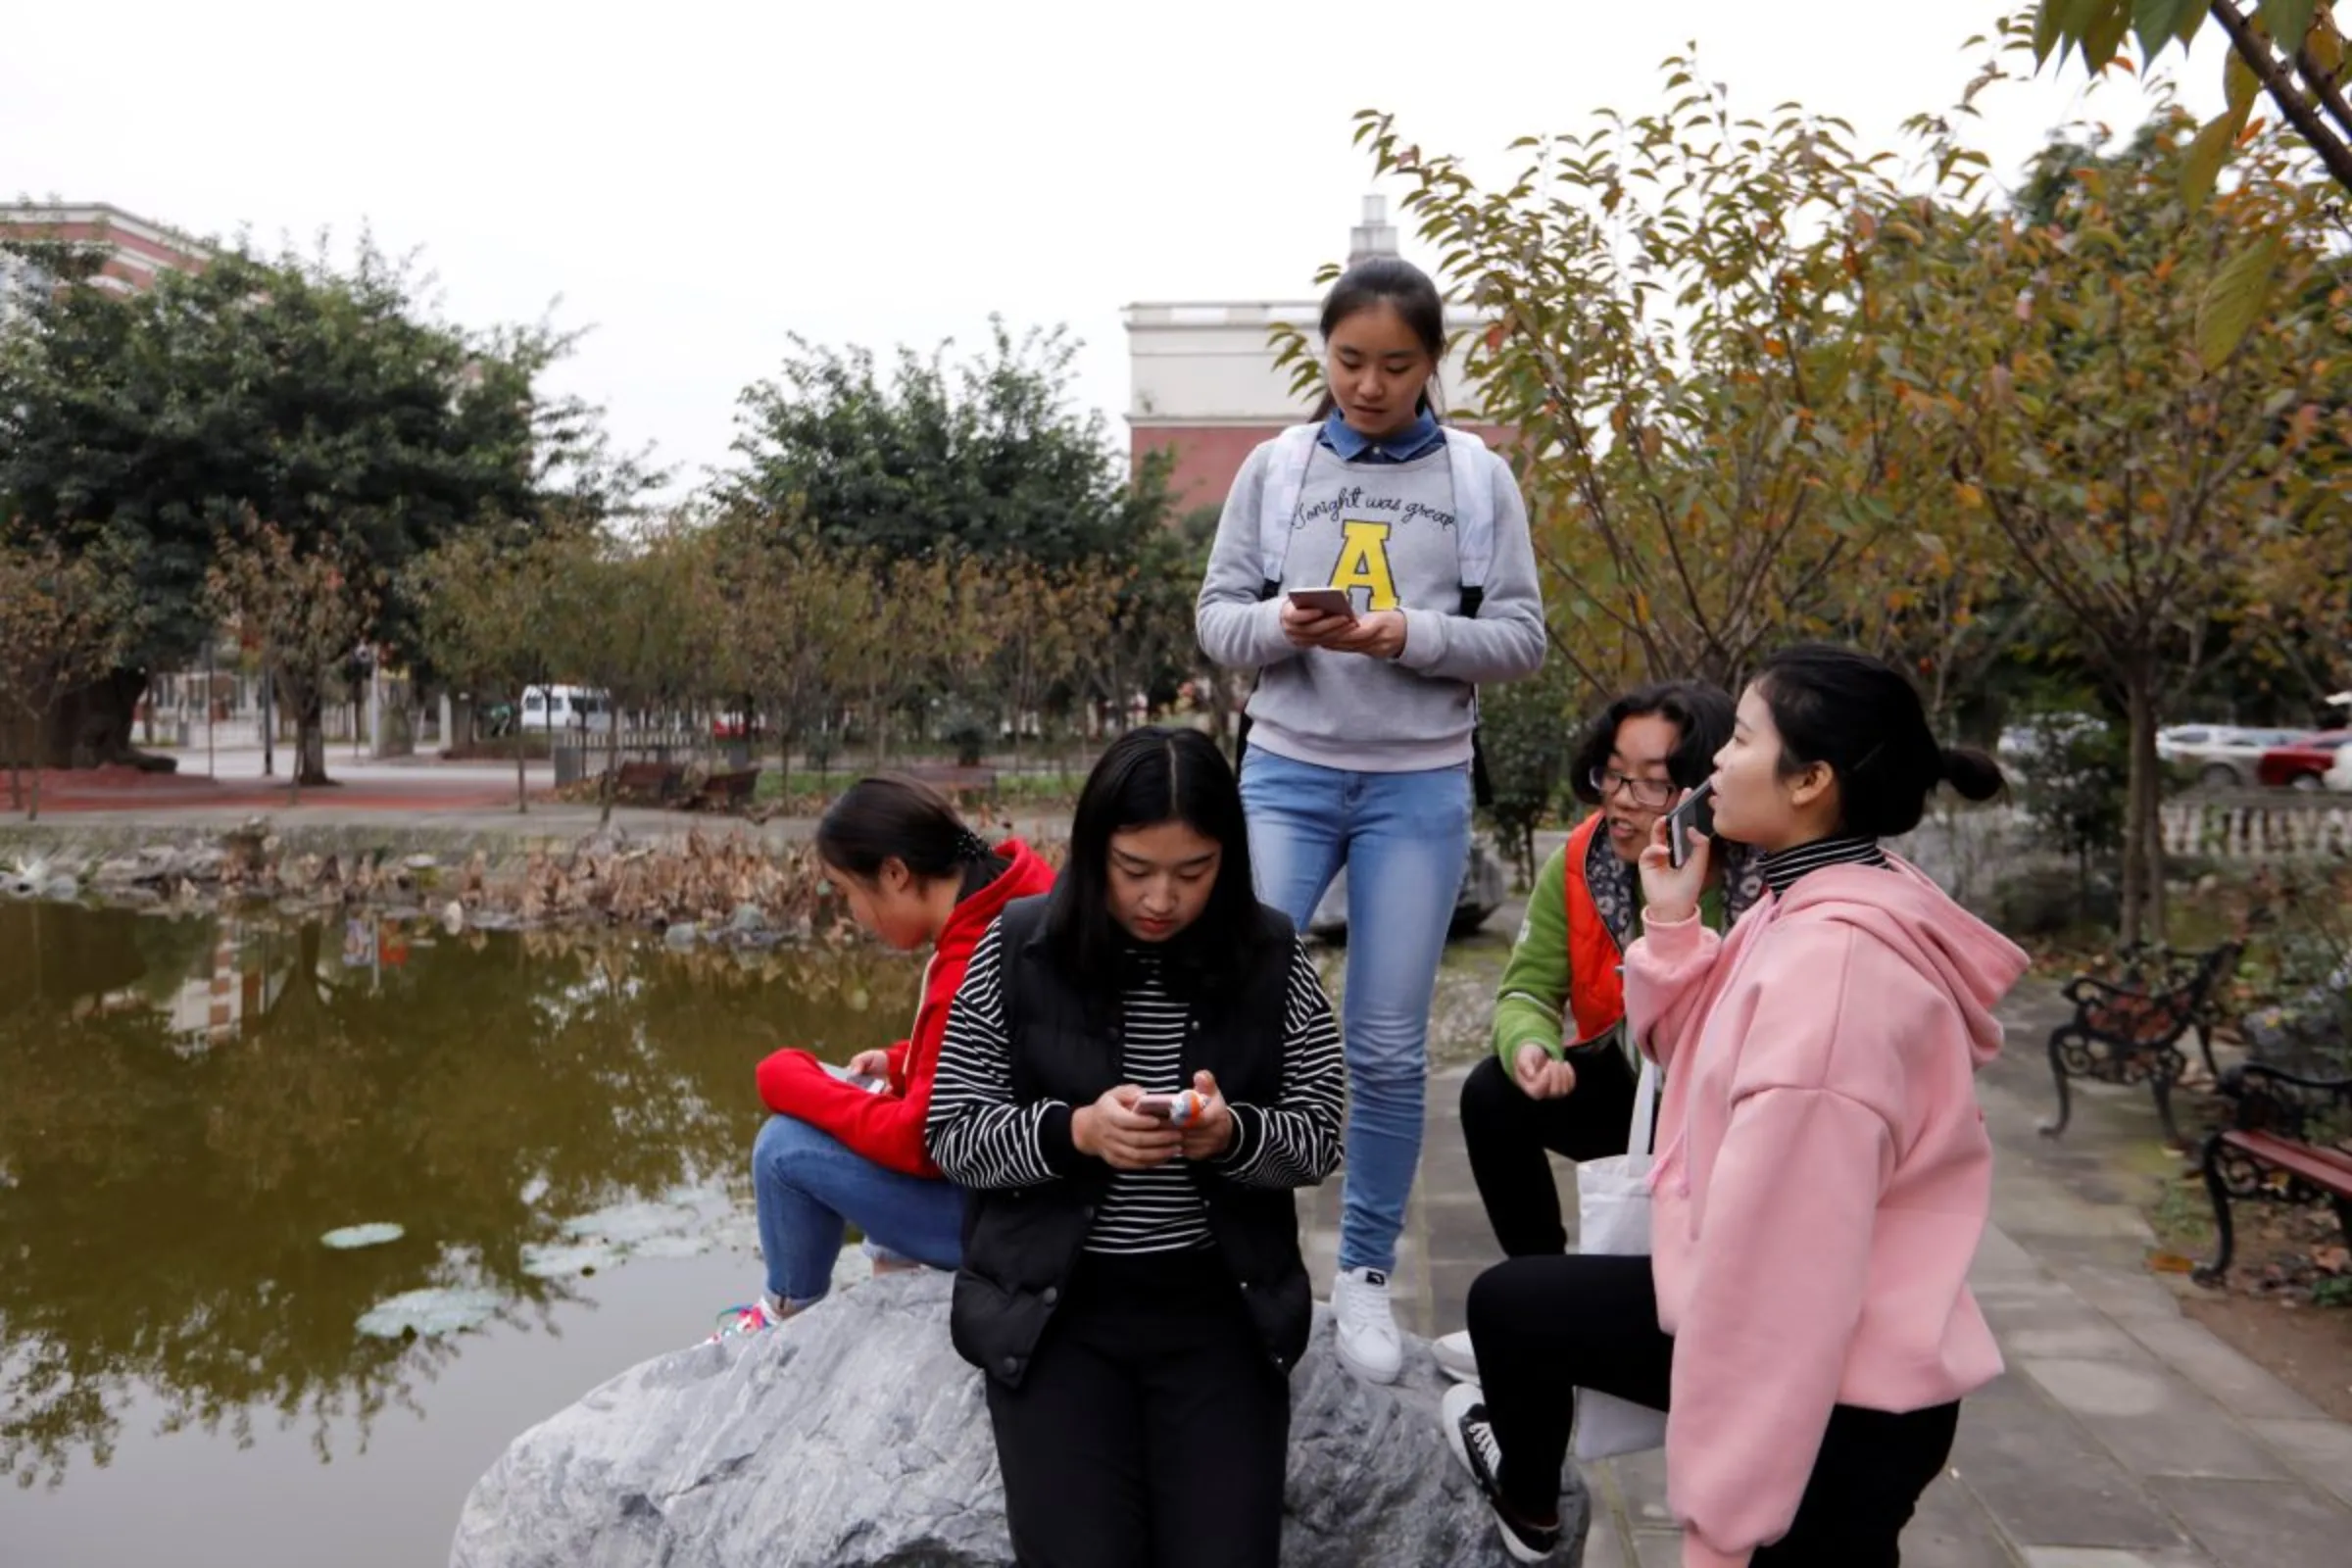 Students majoring in esports and management play games on their phones at the campus of the Sichuan Film and Television University in Chengdu, Sichuan province, China, November 19, 2017